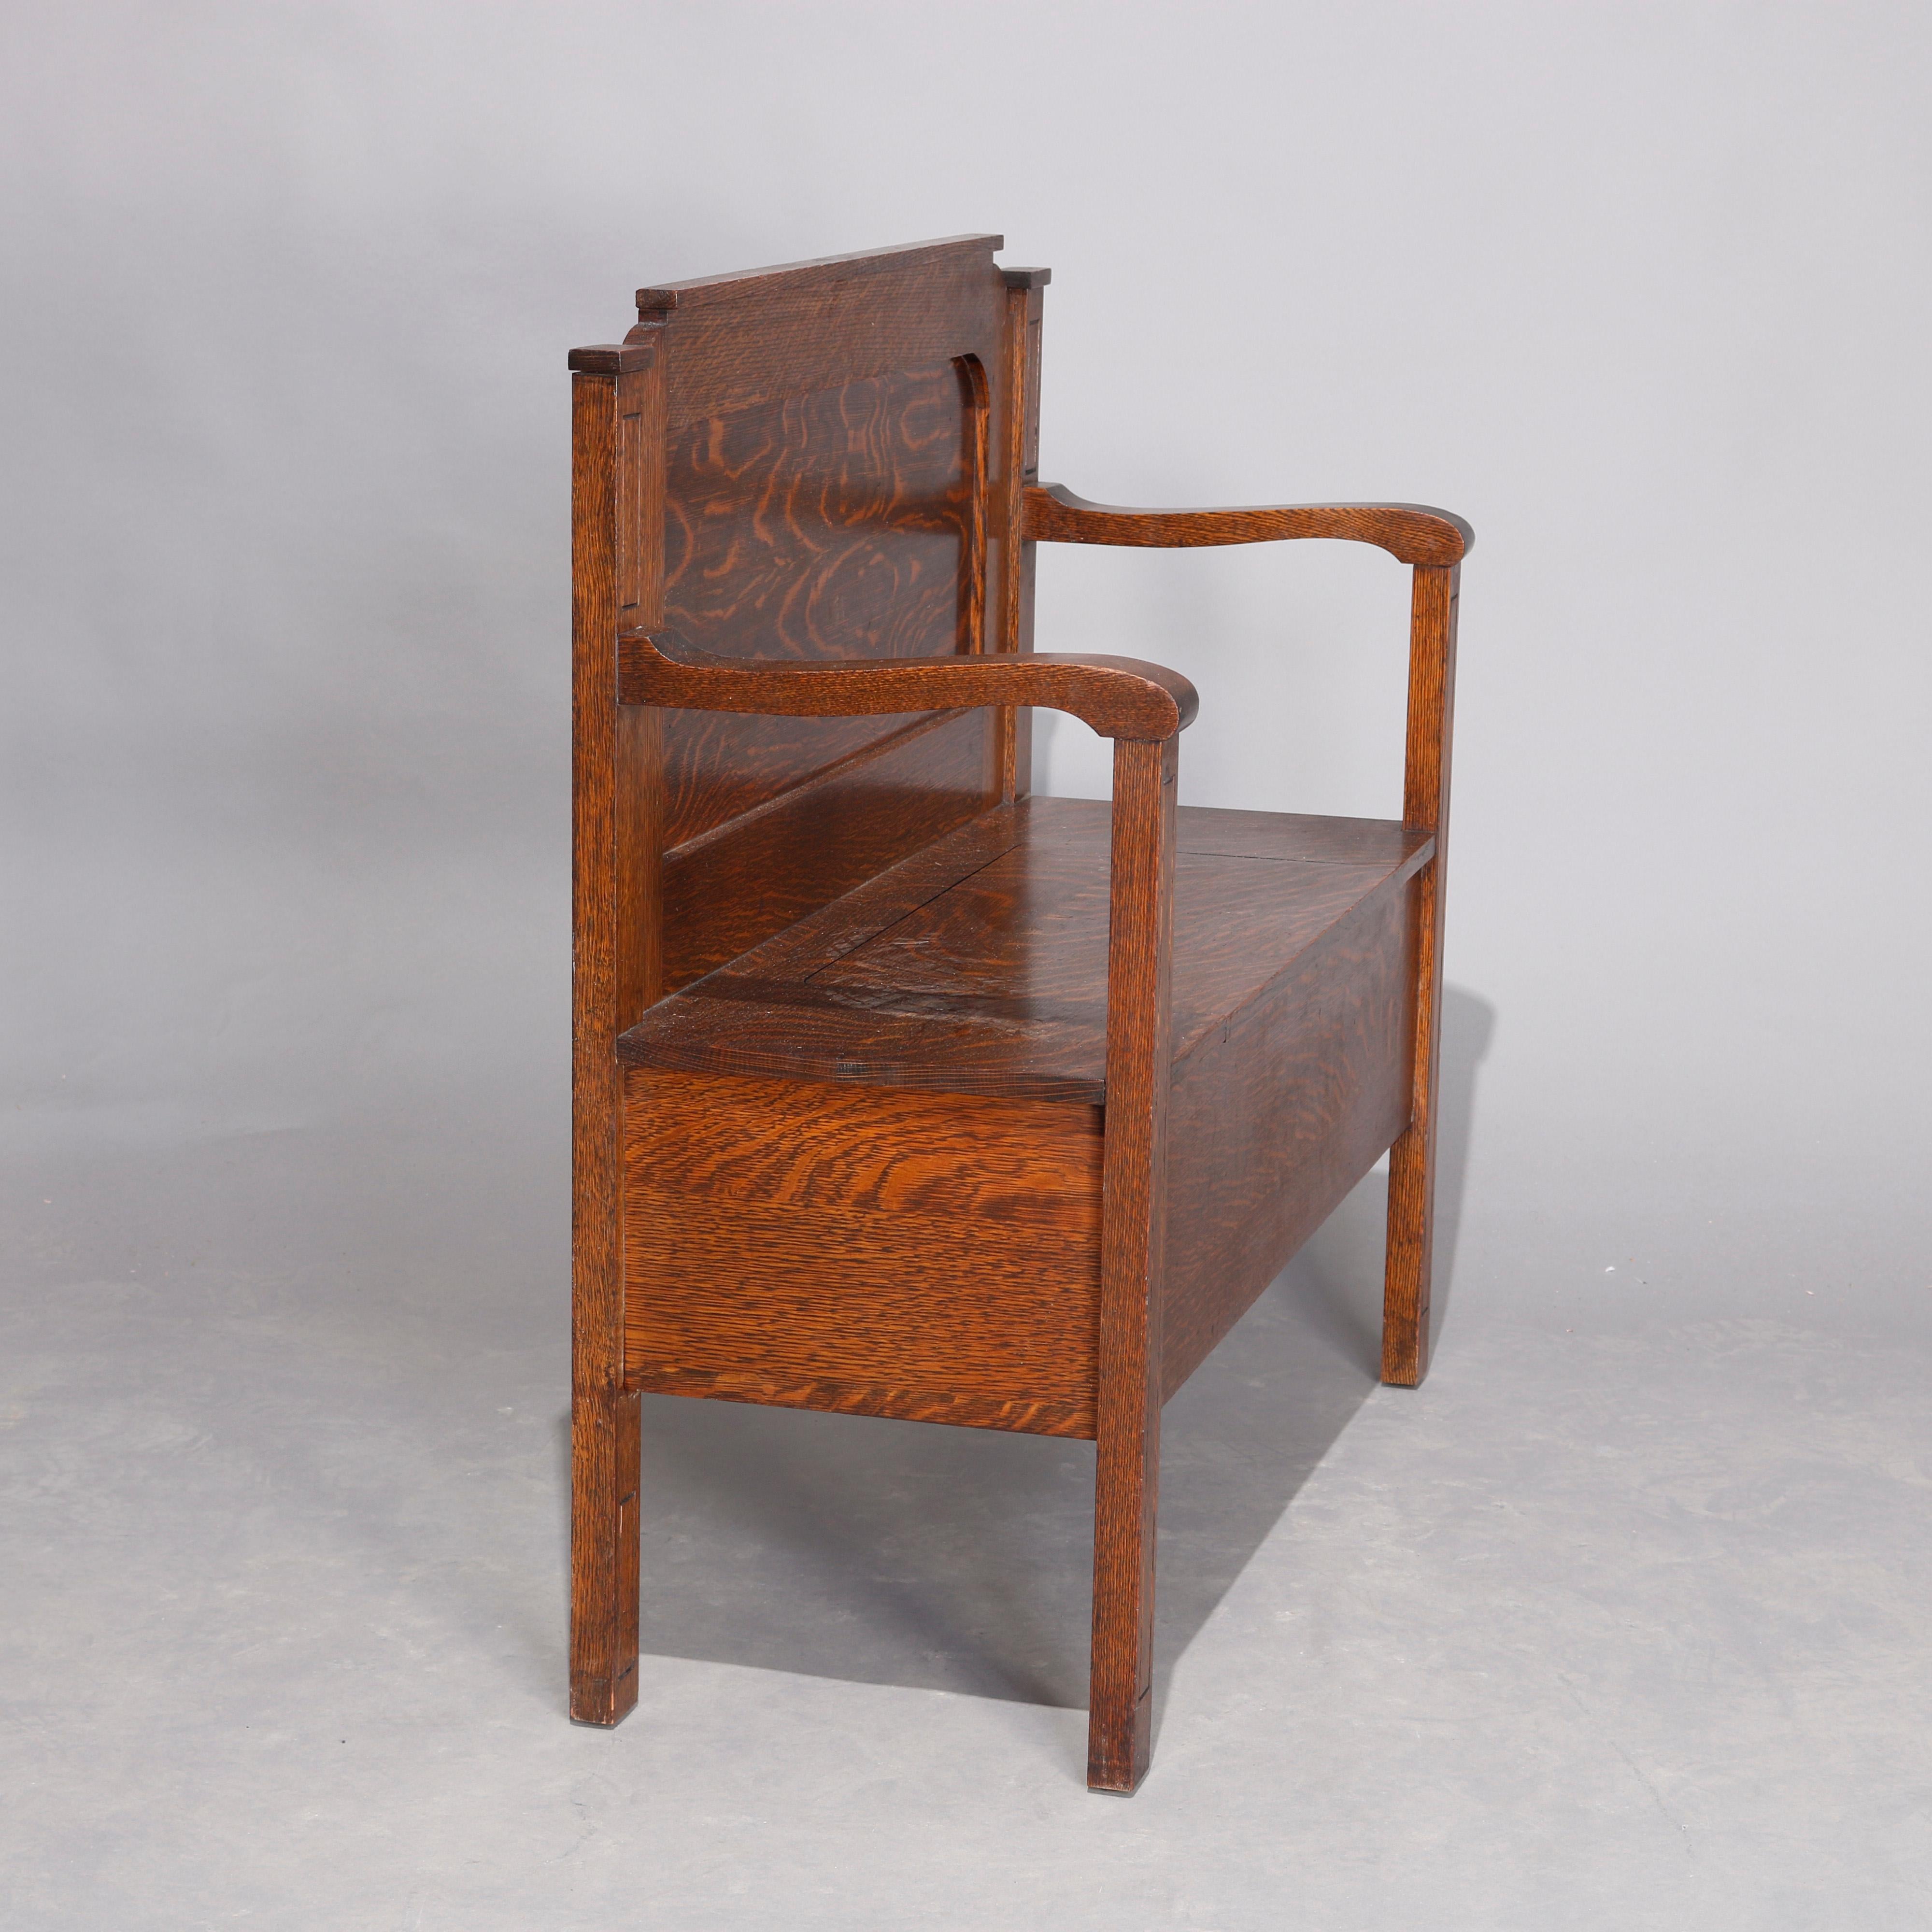 An antique Arts & Crafts mission oak Stickley School hall bench offers shaped and paneled back over lift top seat with scroll form arms, circa 1900.

Measures: 36.25